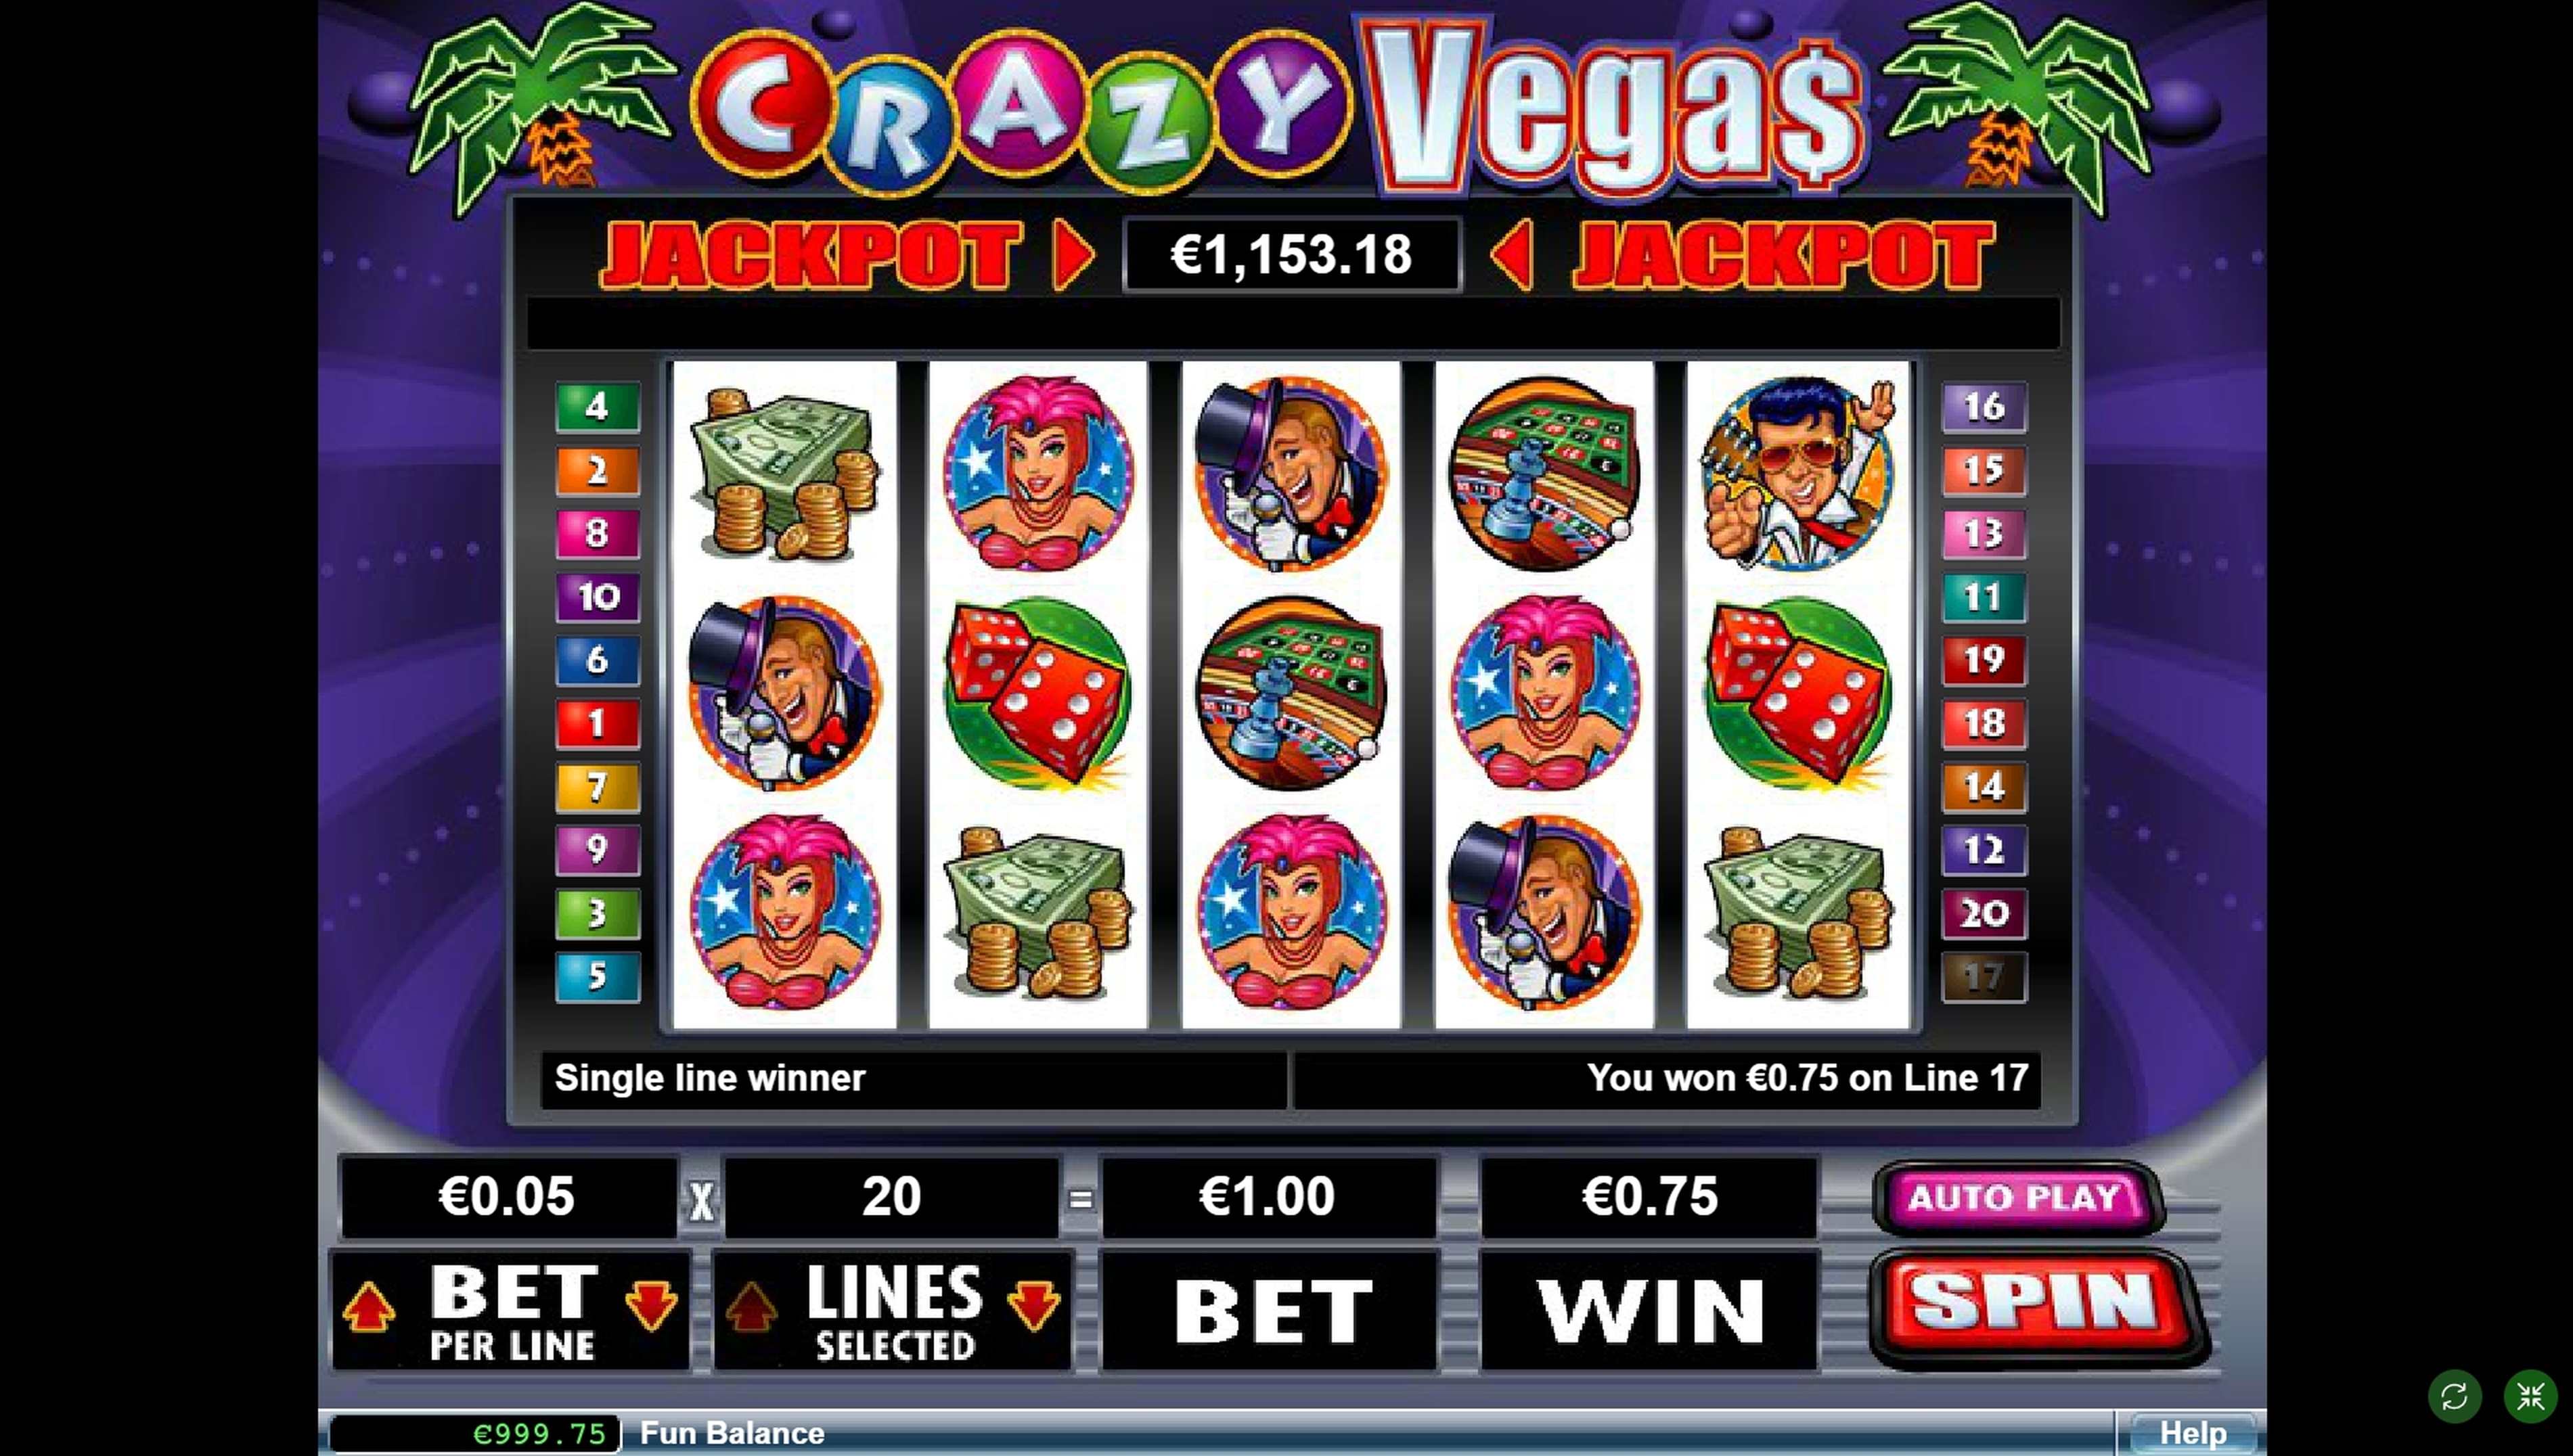 Win Money in Crazy Vegas Free Slot Game by Real Time Gaming